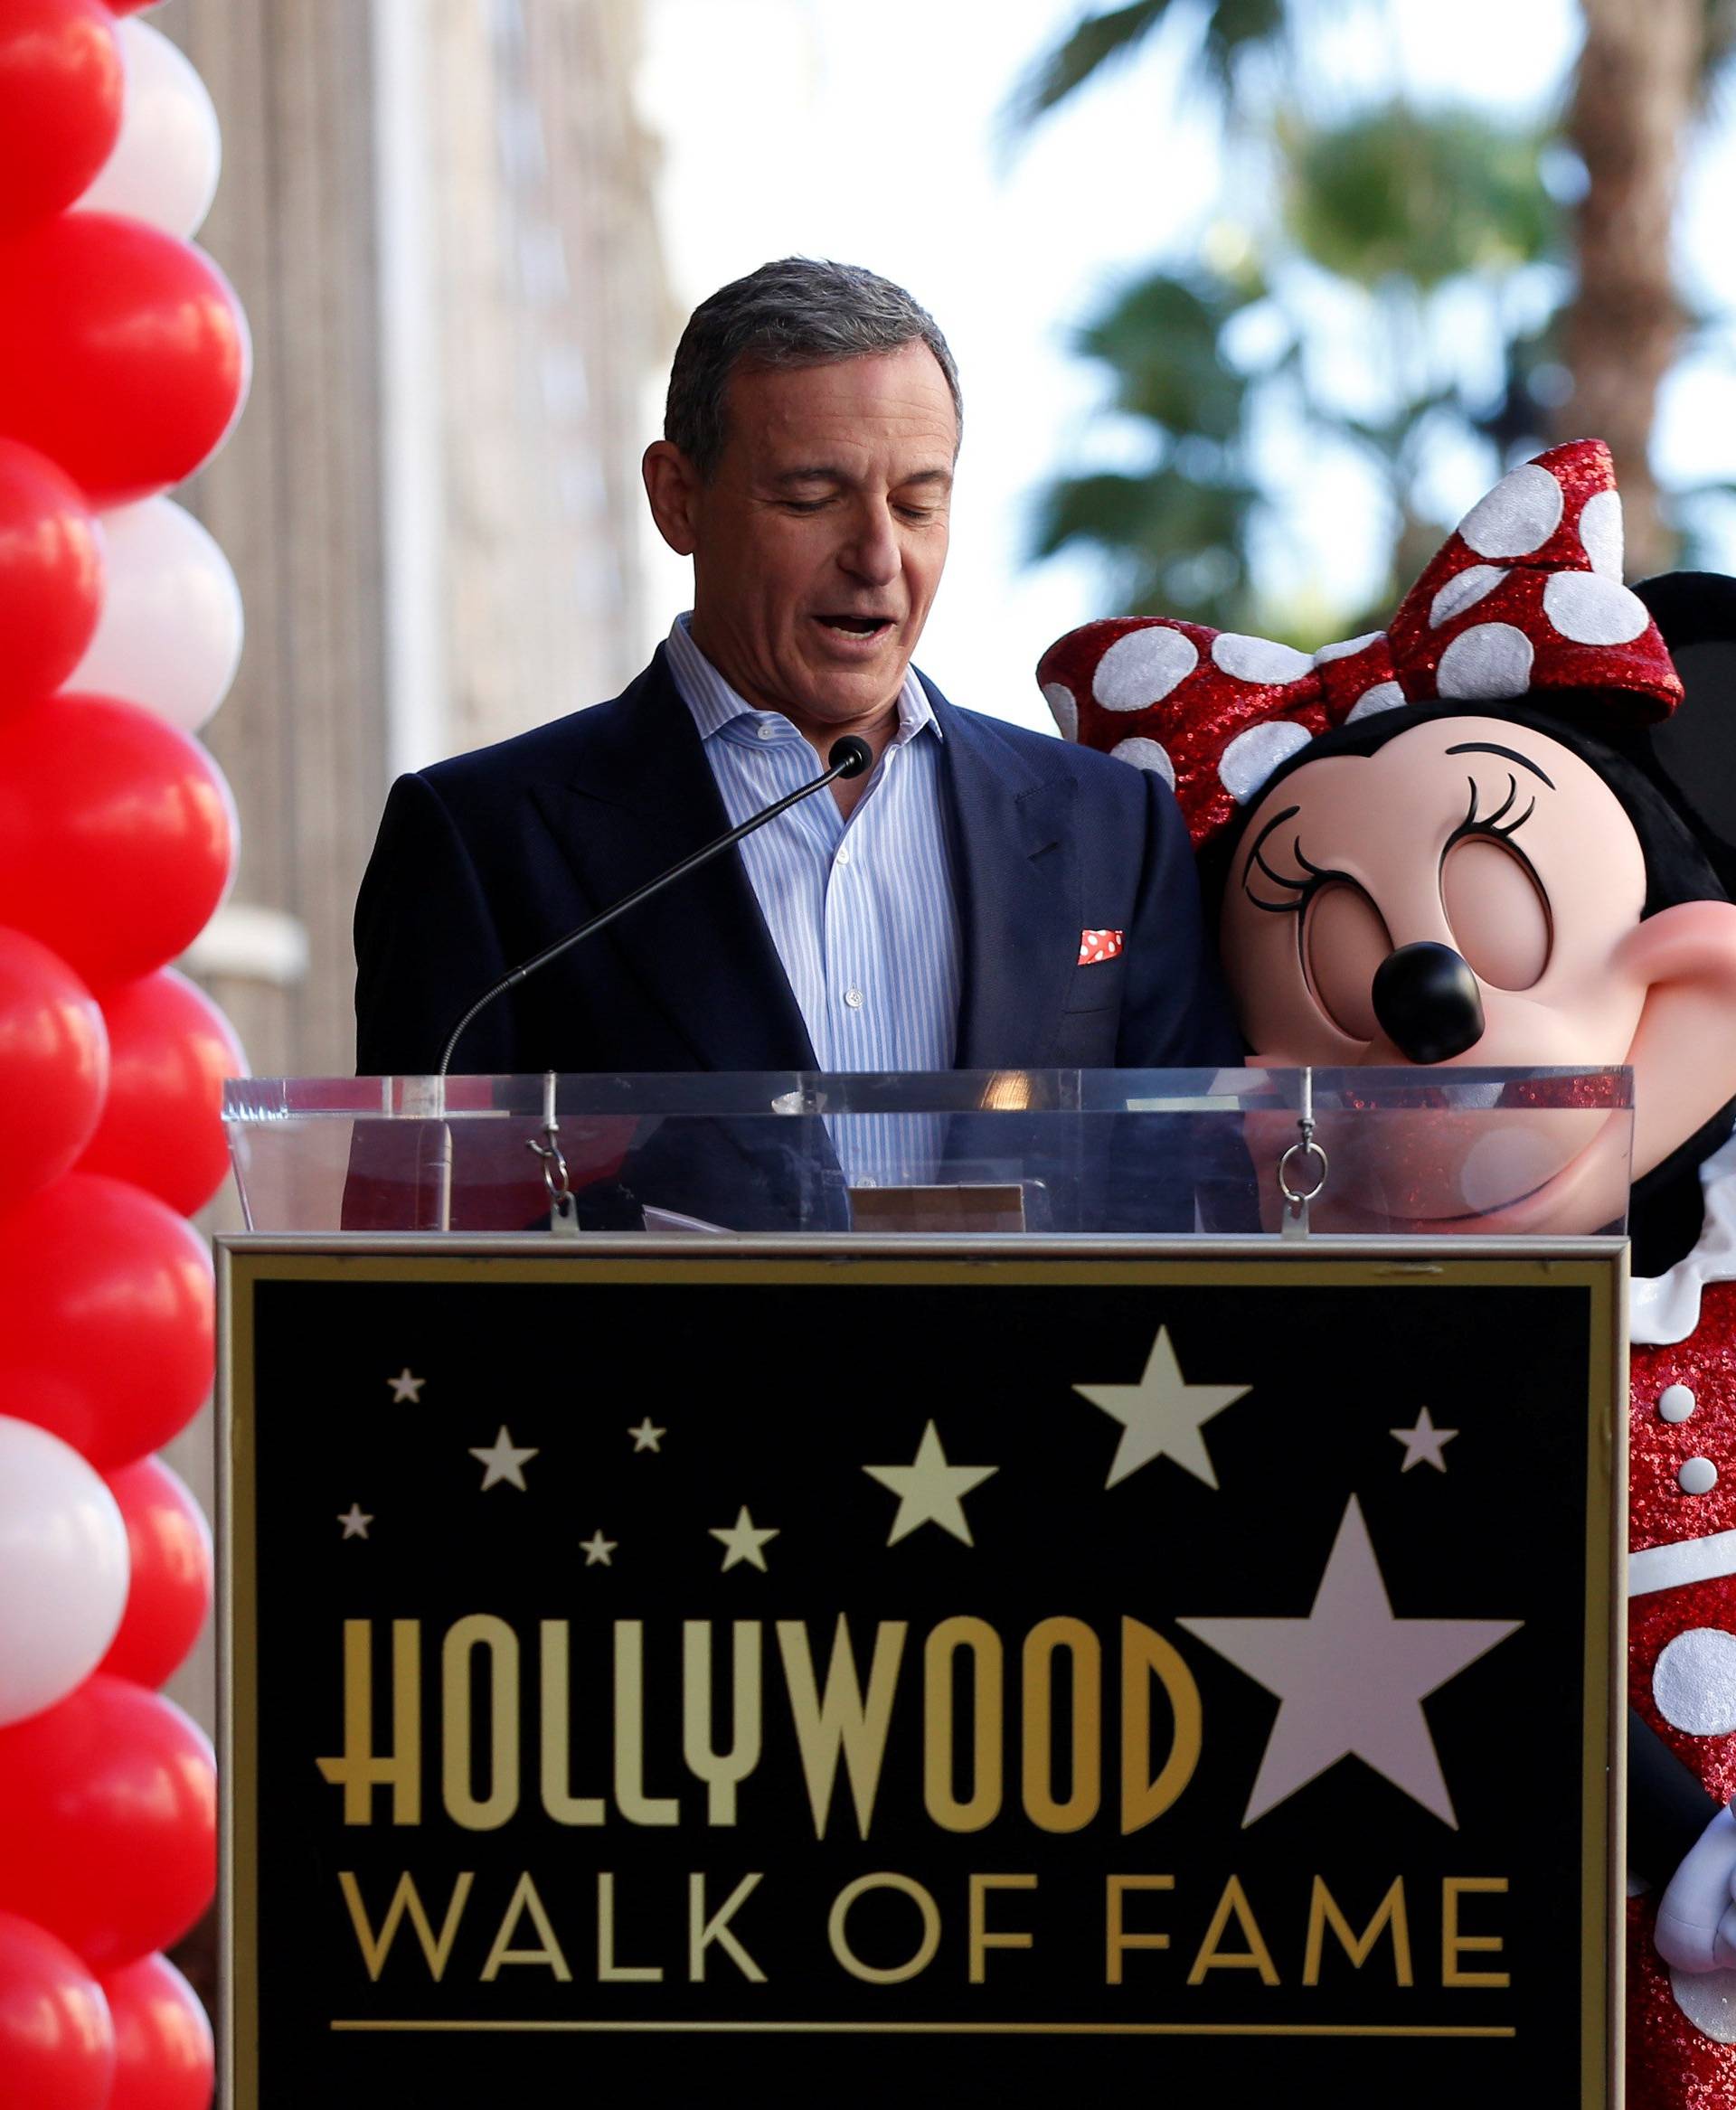 Chairman and CEO of The Walt Disney Company Iger speaks next to the character of Minnie Mouse at the unveiling of her star on the Hollywood Walk of Fame in Los Angeles